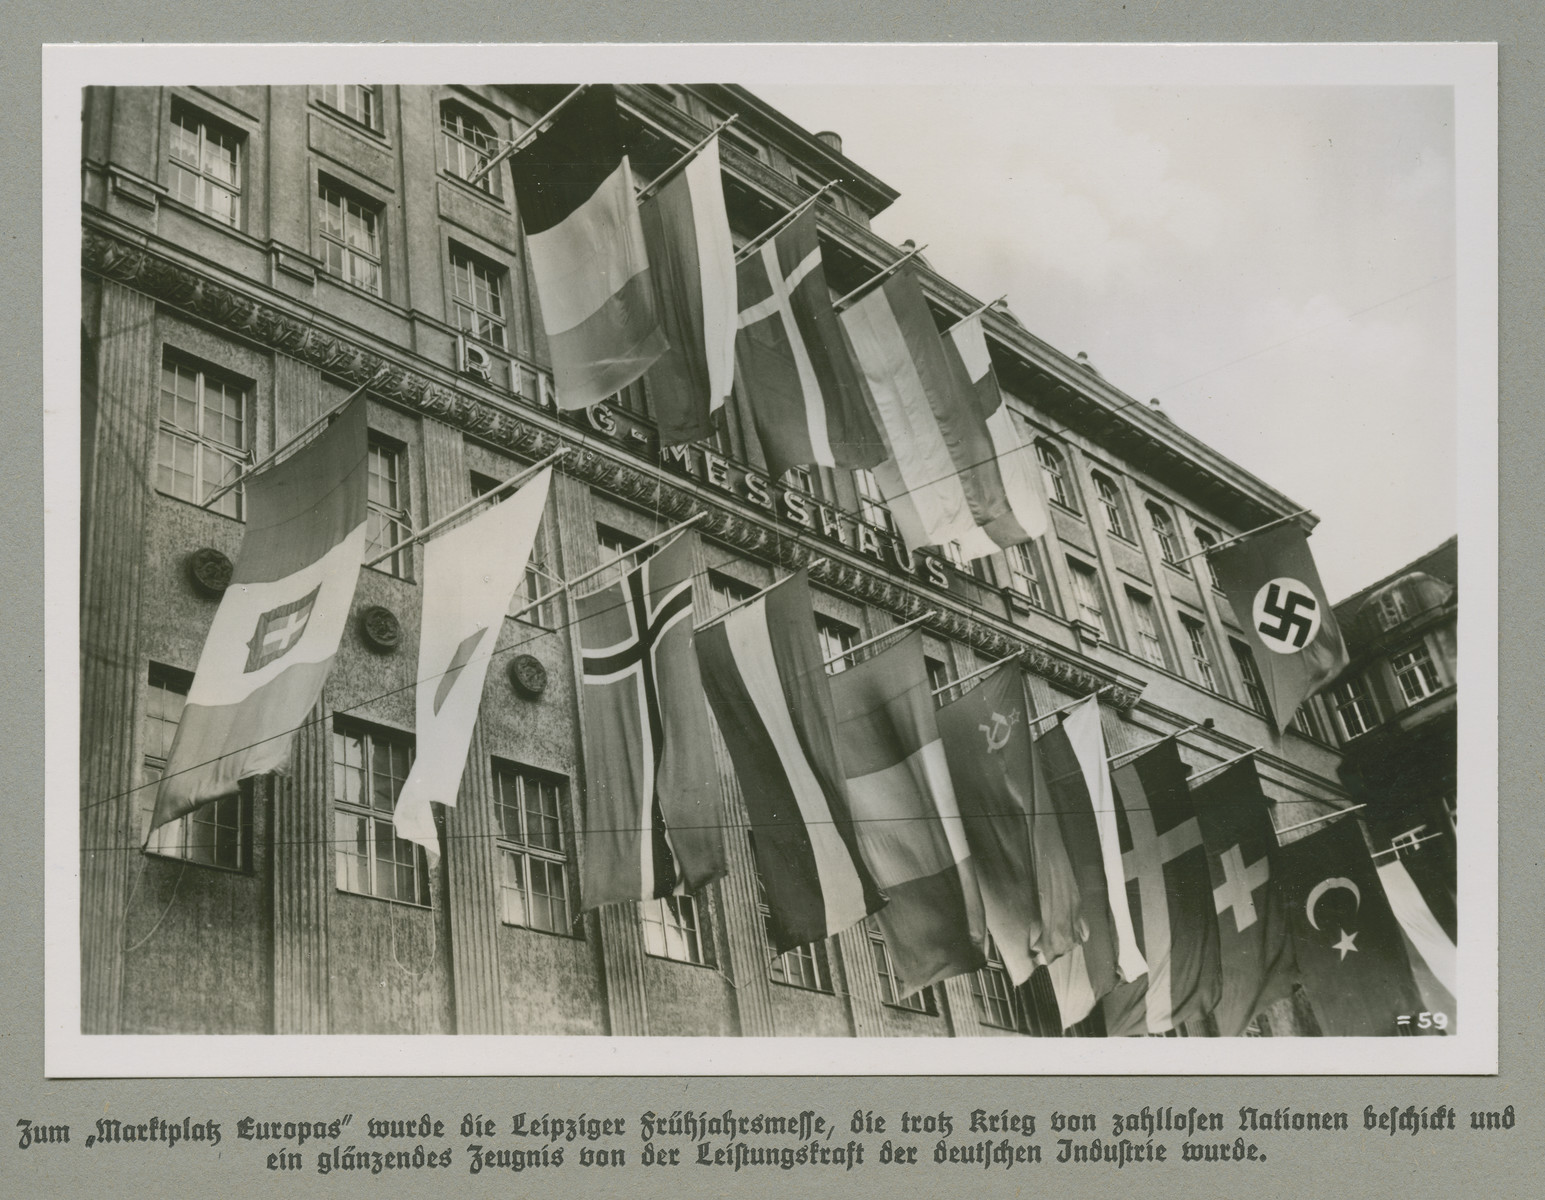 European flags are hung on the facade of the Ring-Messhaus in Leipzig, Germany.

The original caption reads: The Leipzig Spring Exhibition became "Europe's Marketplace," which in spite of the war has been fueled by countless Nations, and was a gleaming testimony to the power of German industry.